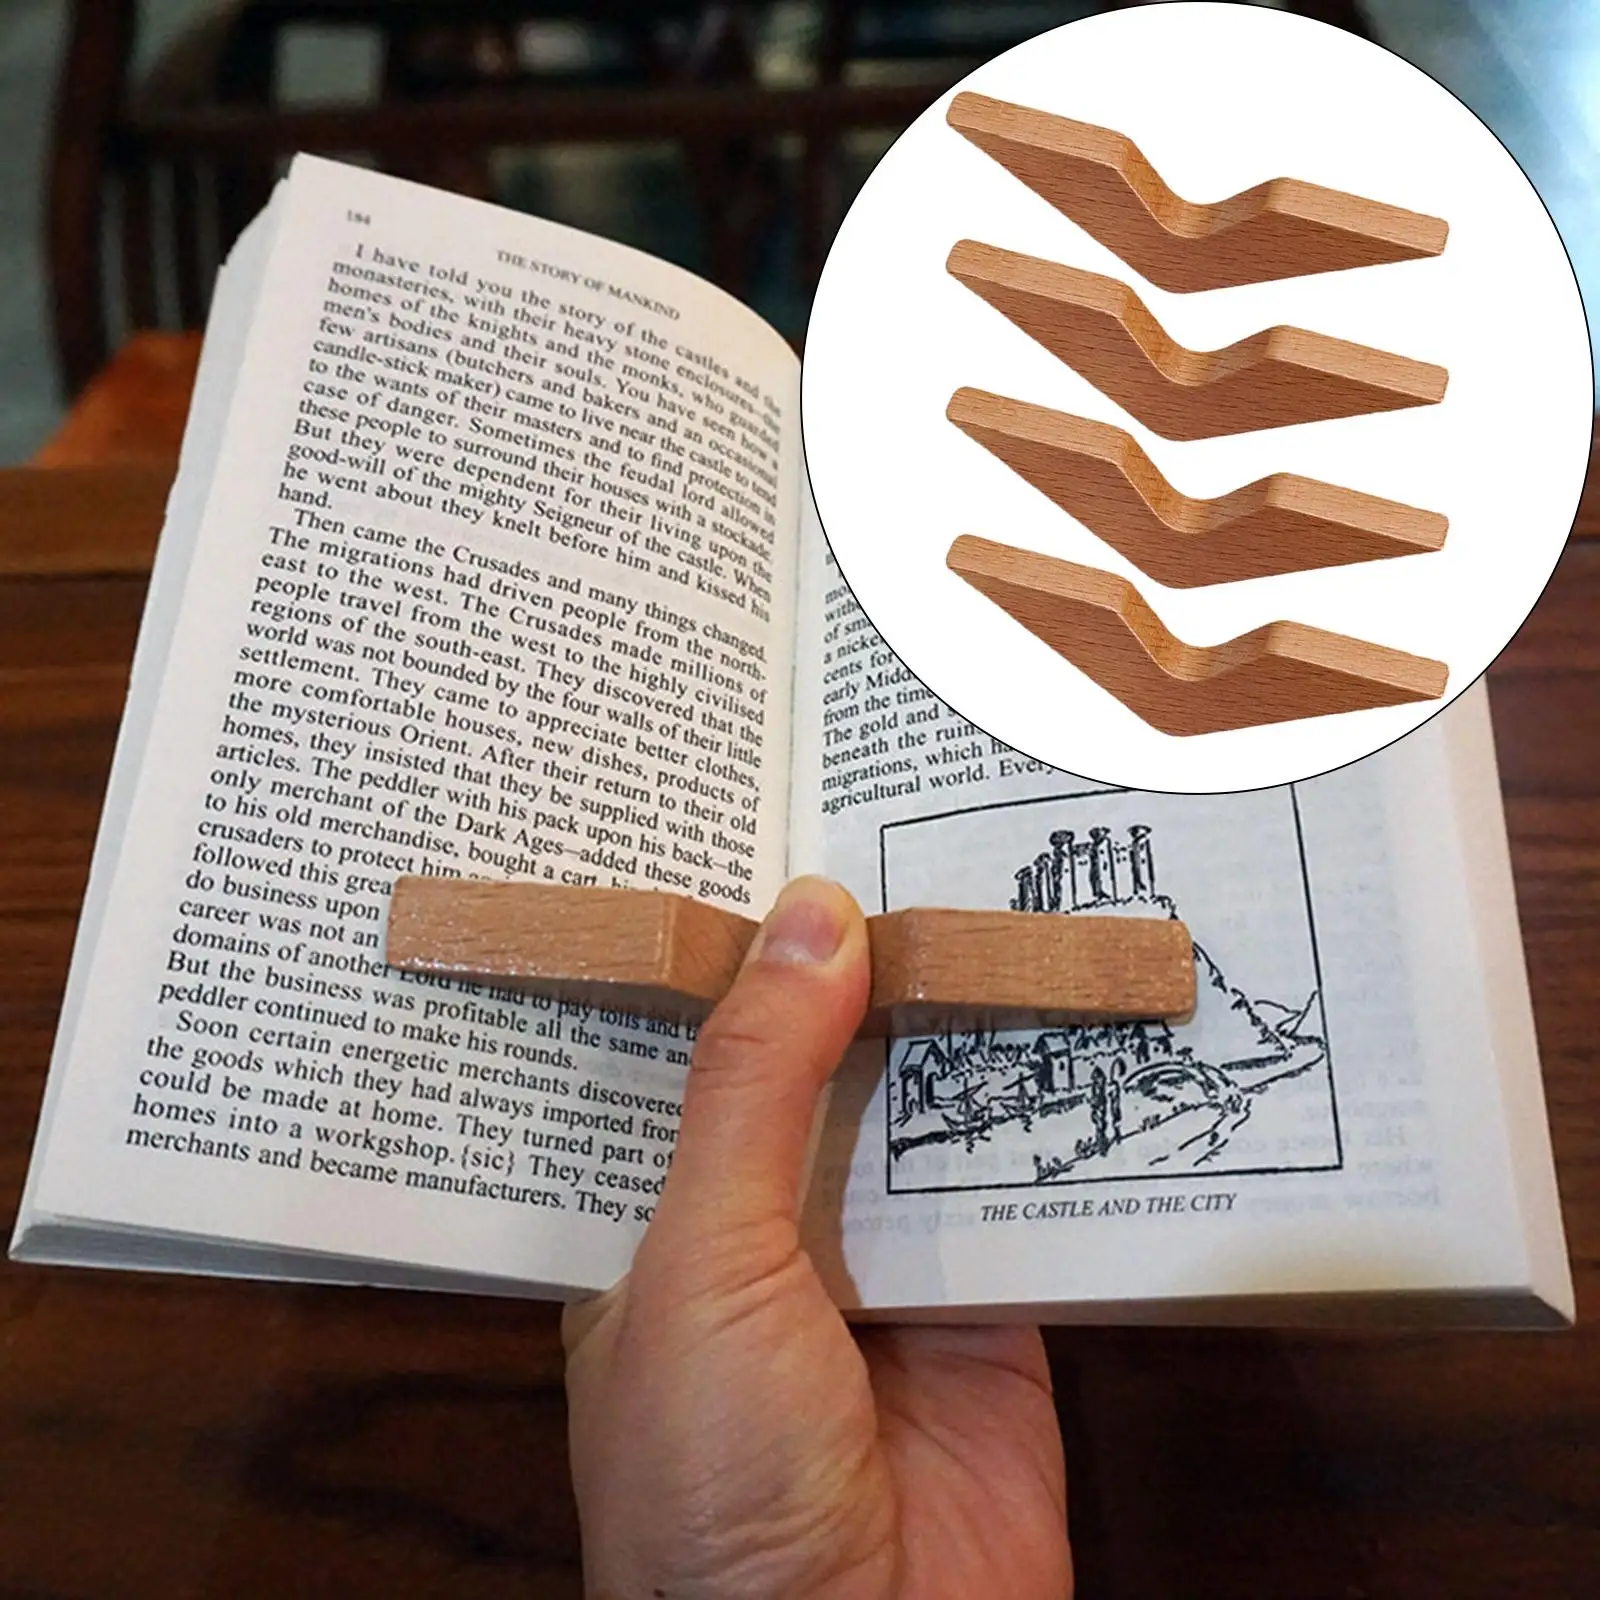 4x Wooden Thumb Page Holder Reading Bookmark Handmade Thumb Bookmark Book Reading Holder